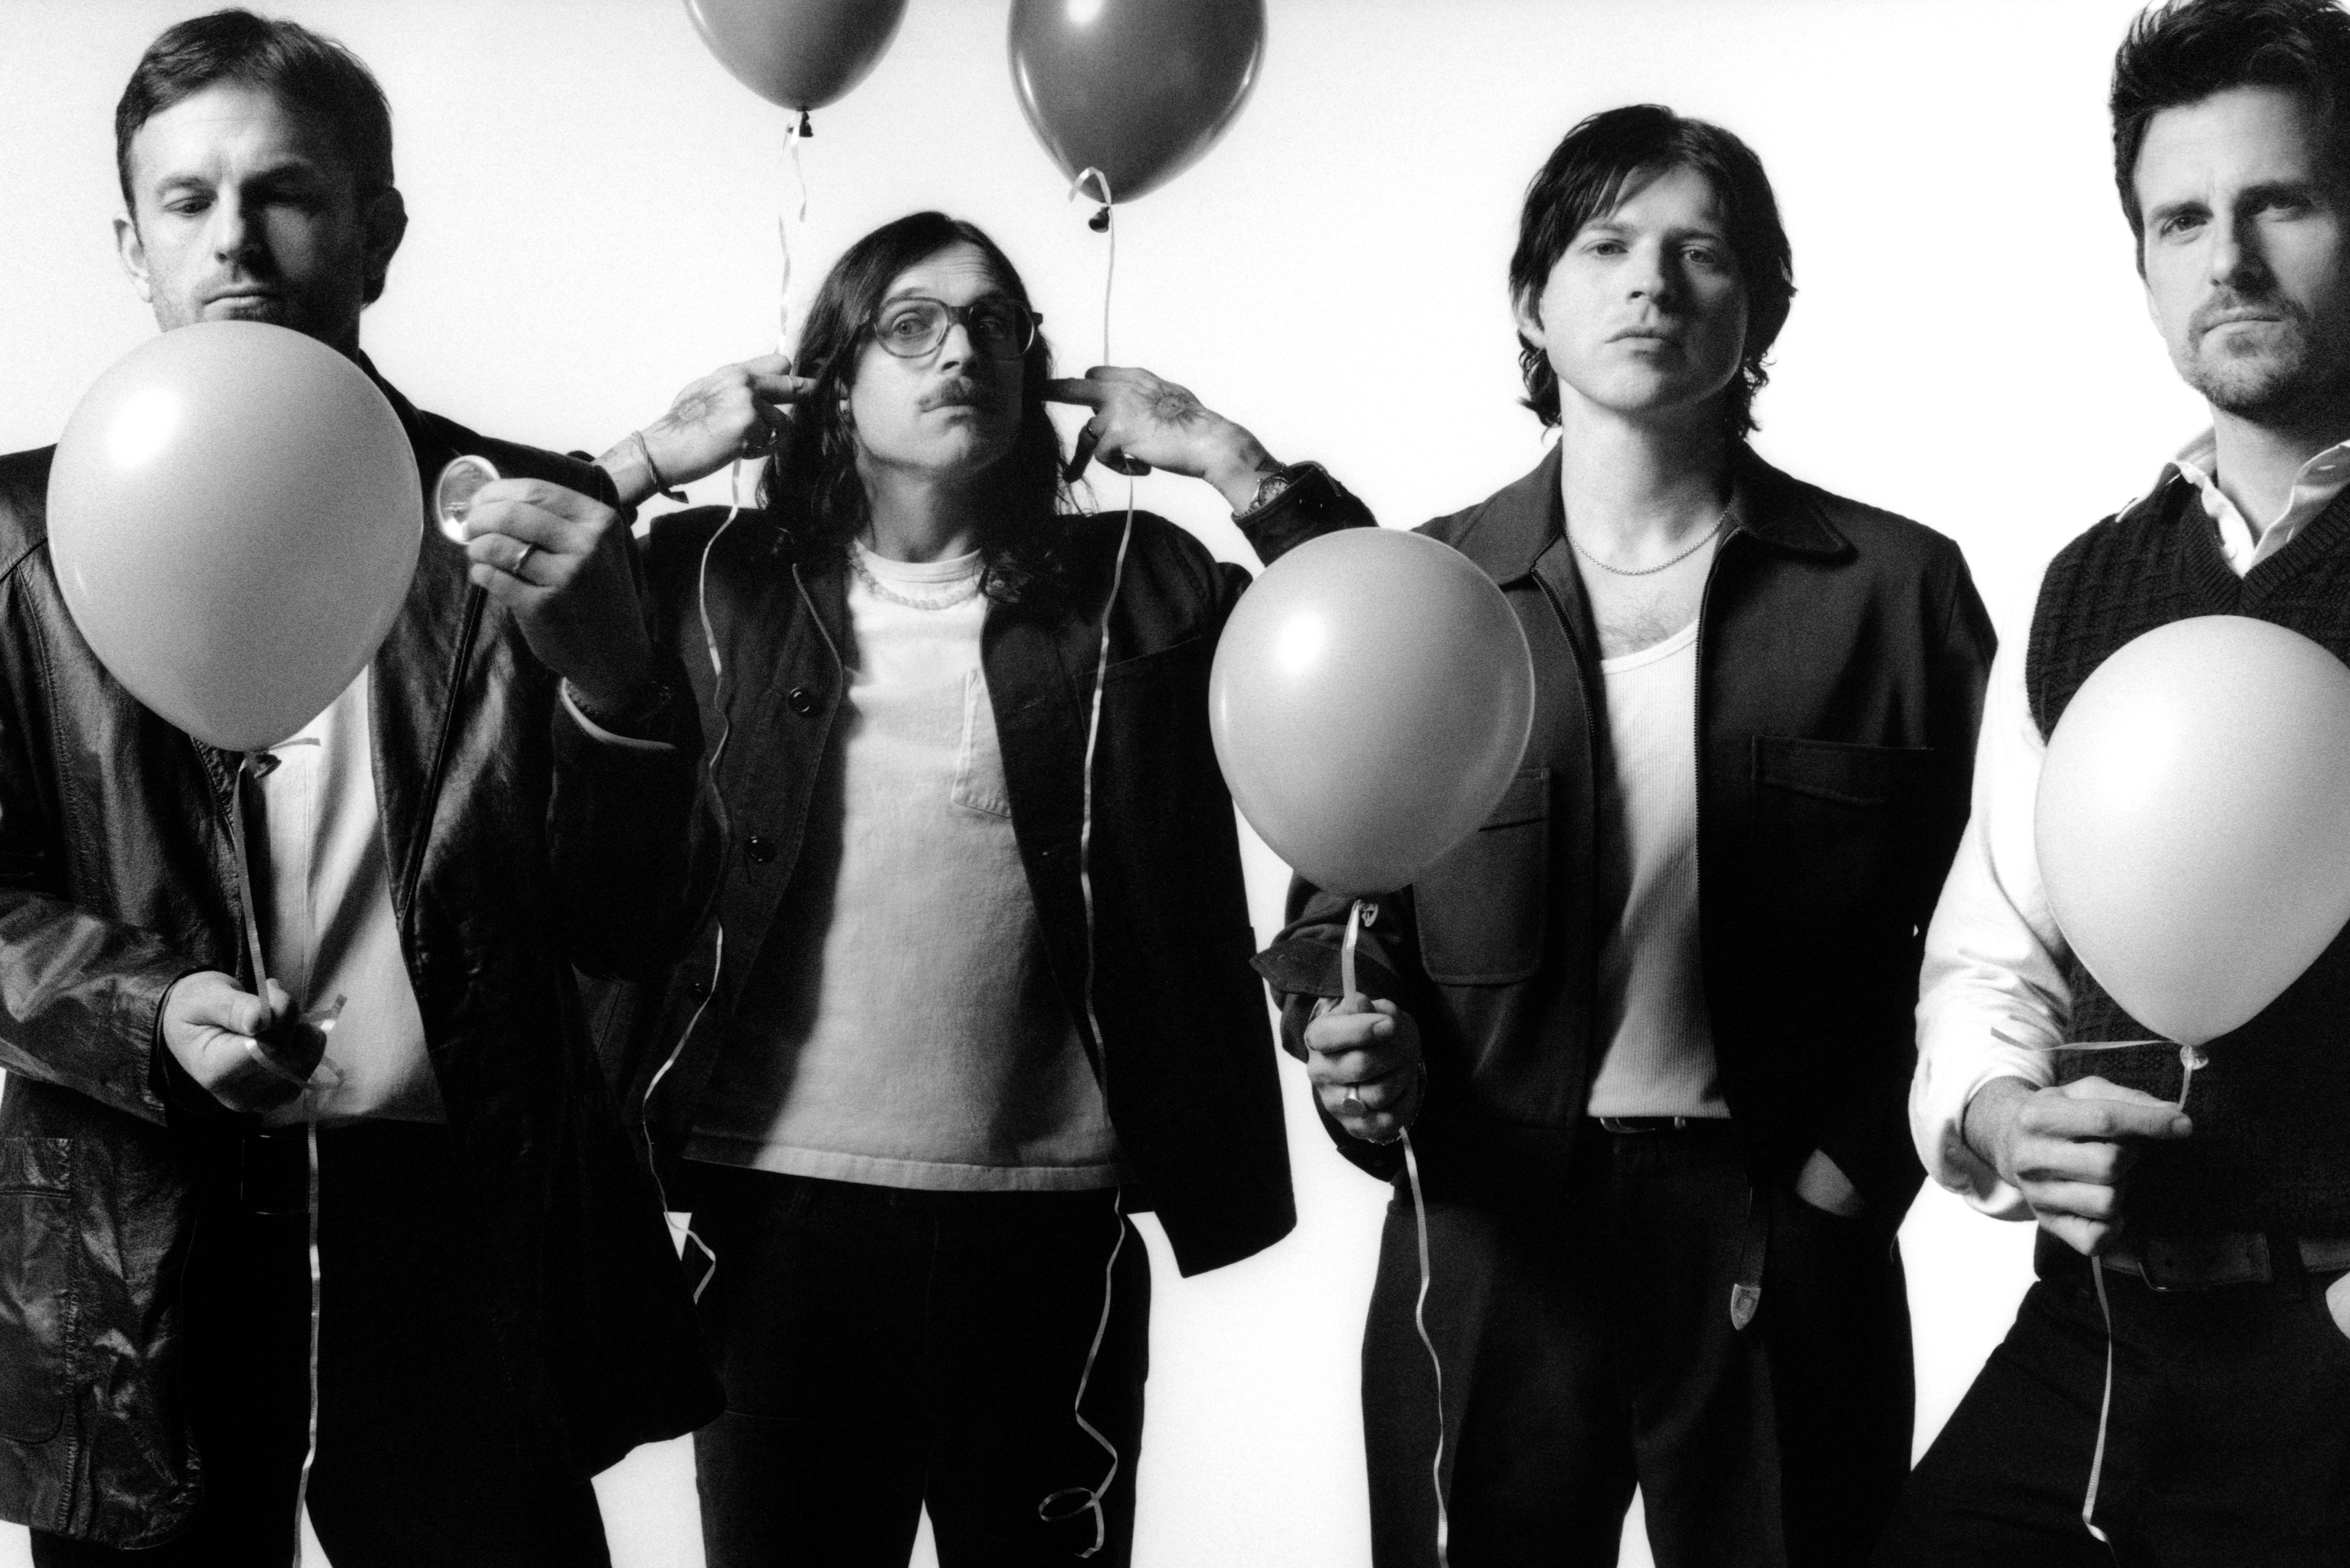 Having a ball: Kings of Leon in promotional photos for their new album